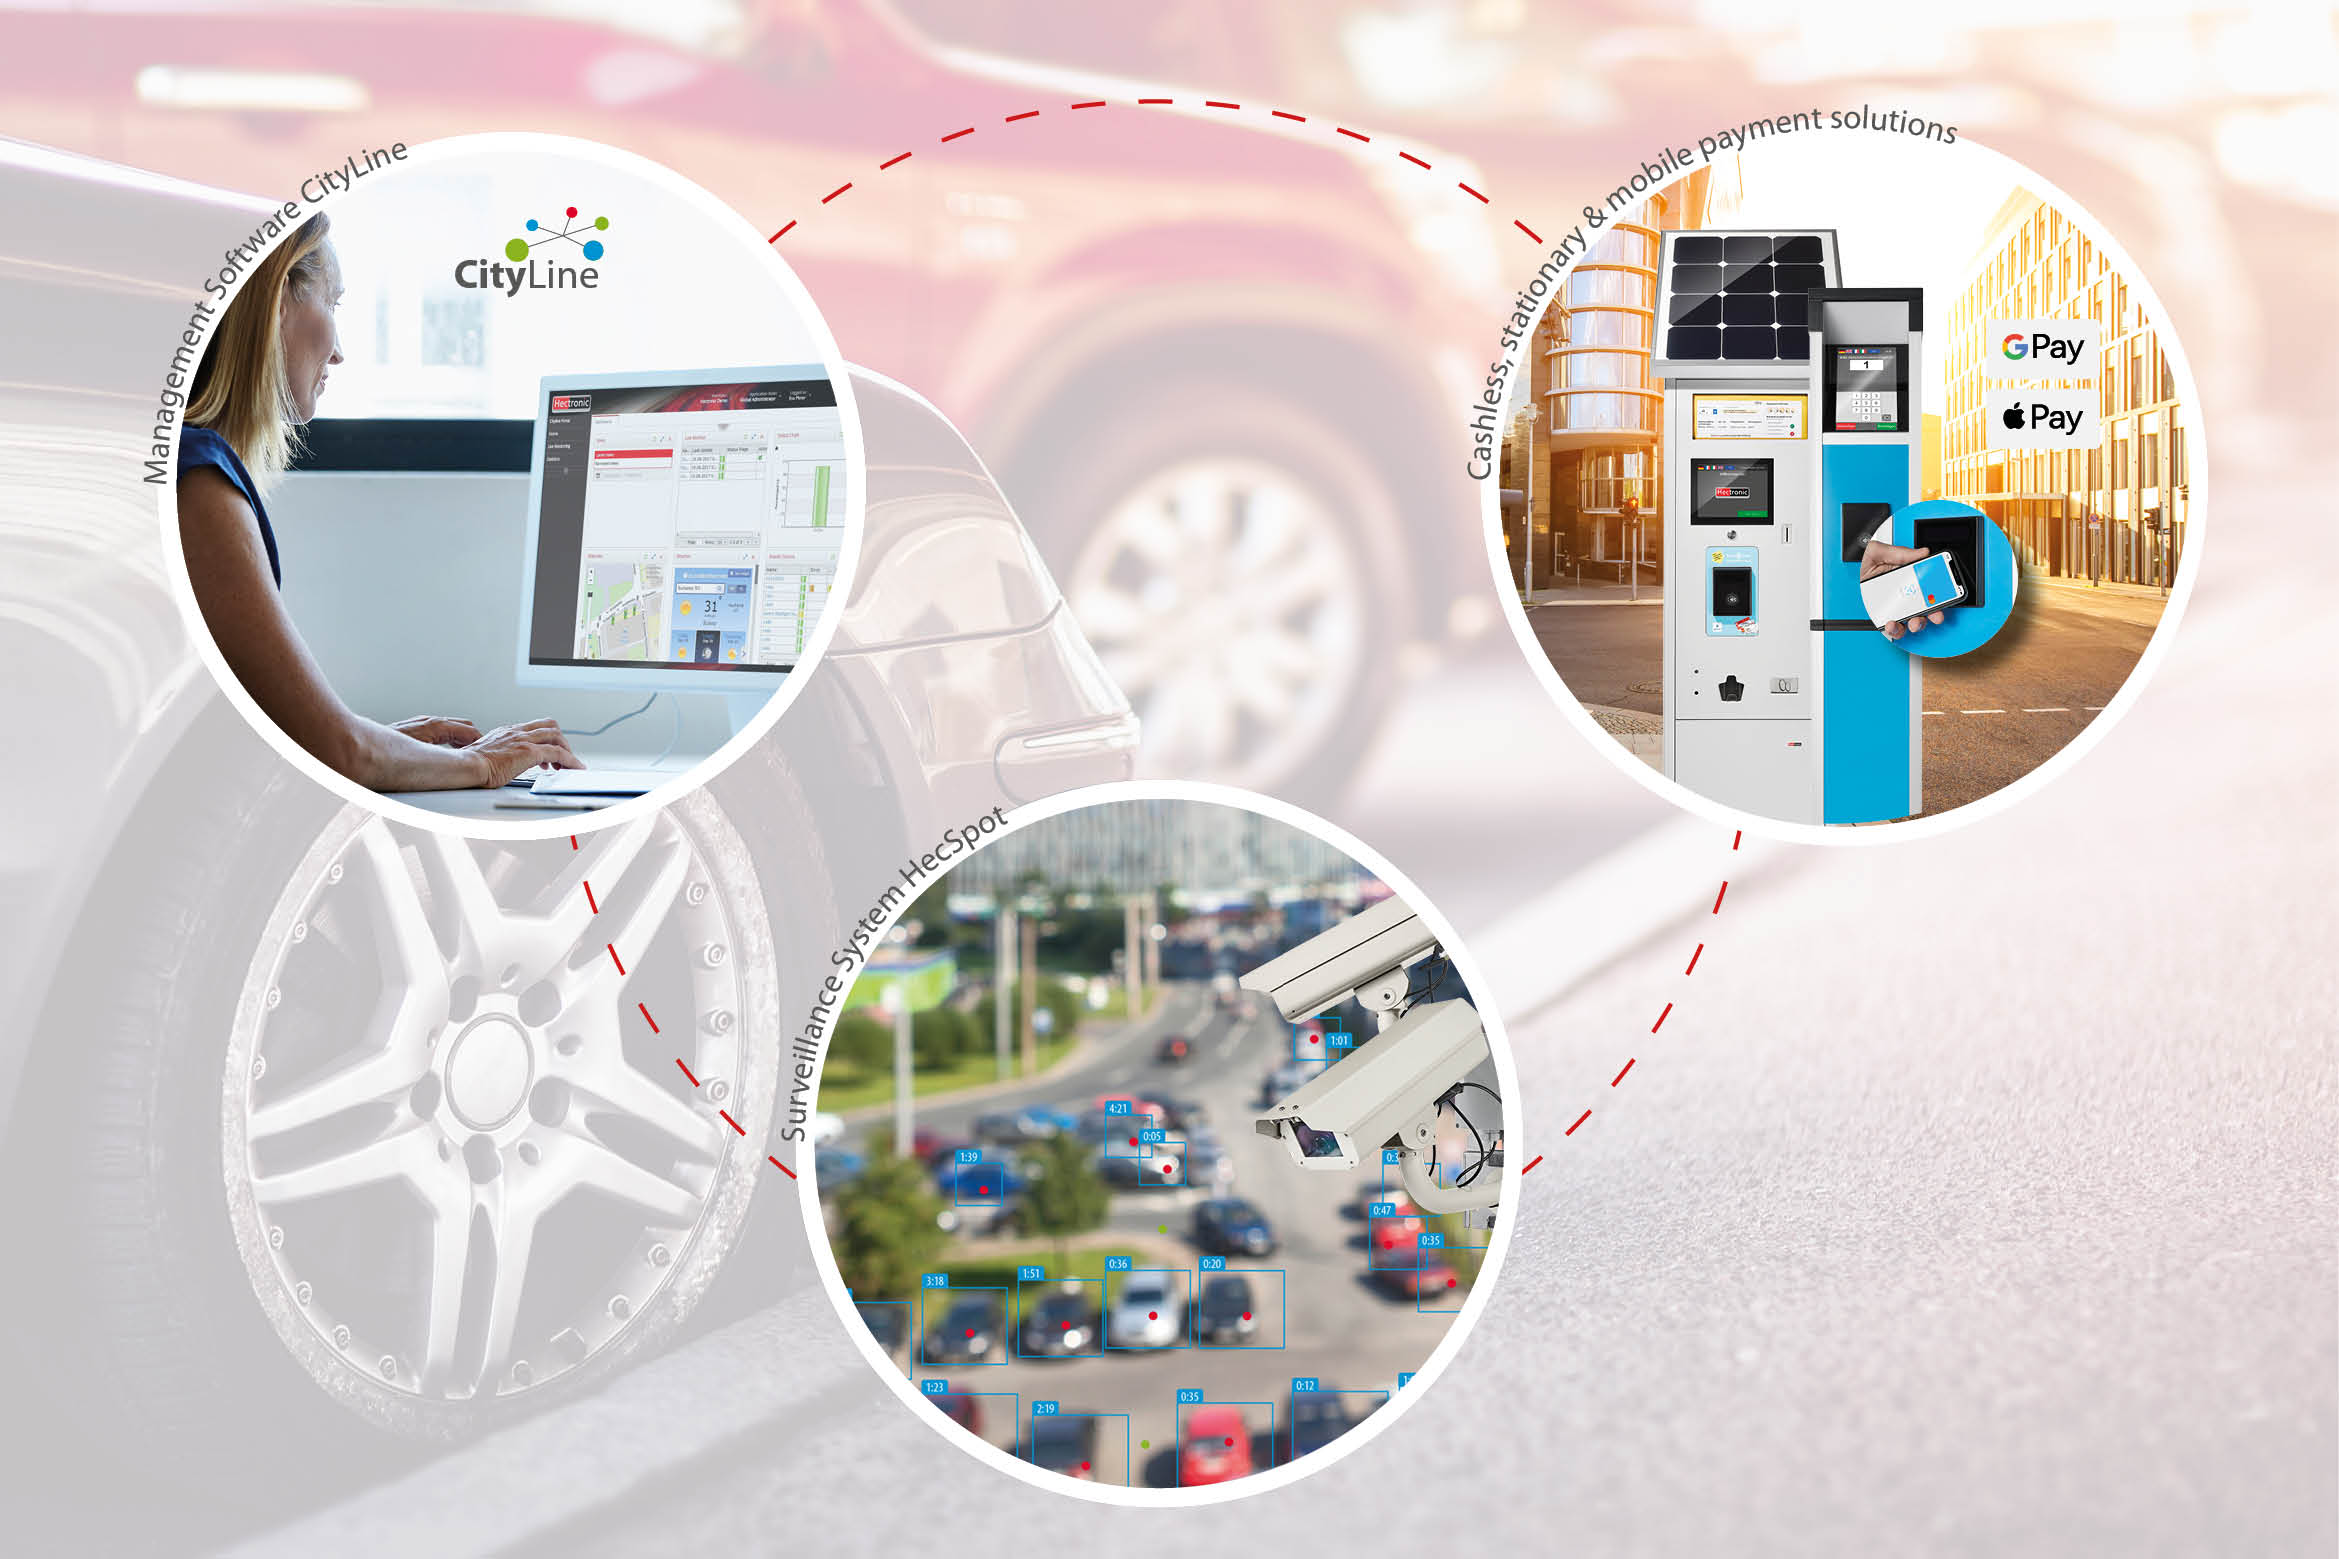 Hectronic offers operators, cities and communities the complete parking management from one source